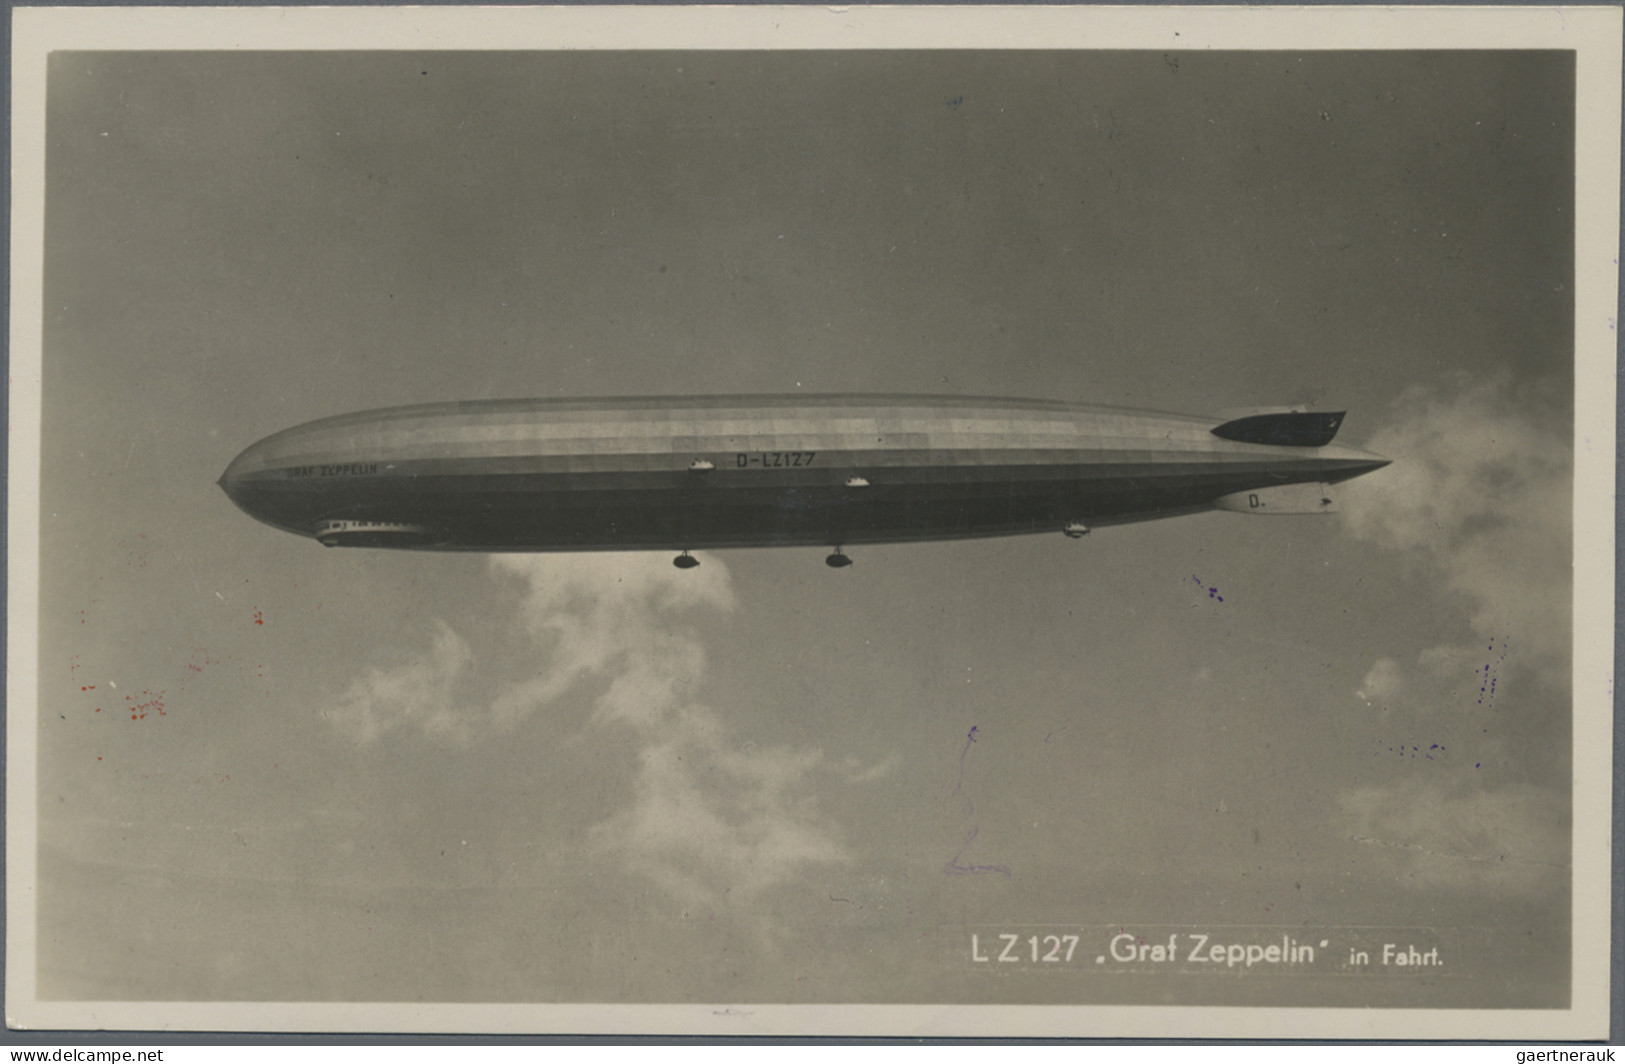 Zeppelin Mail - Germany: 1933, 4th South America Flight Incombination With Catap - Luft- Und Zeppelinpost